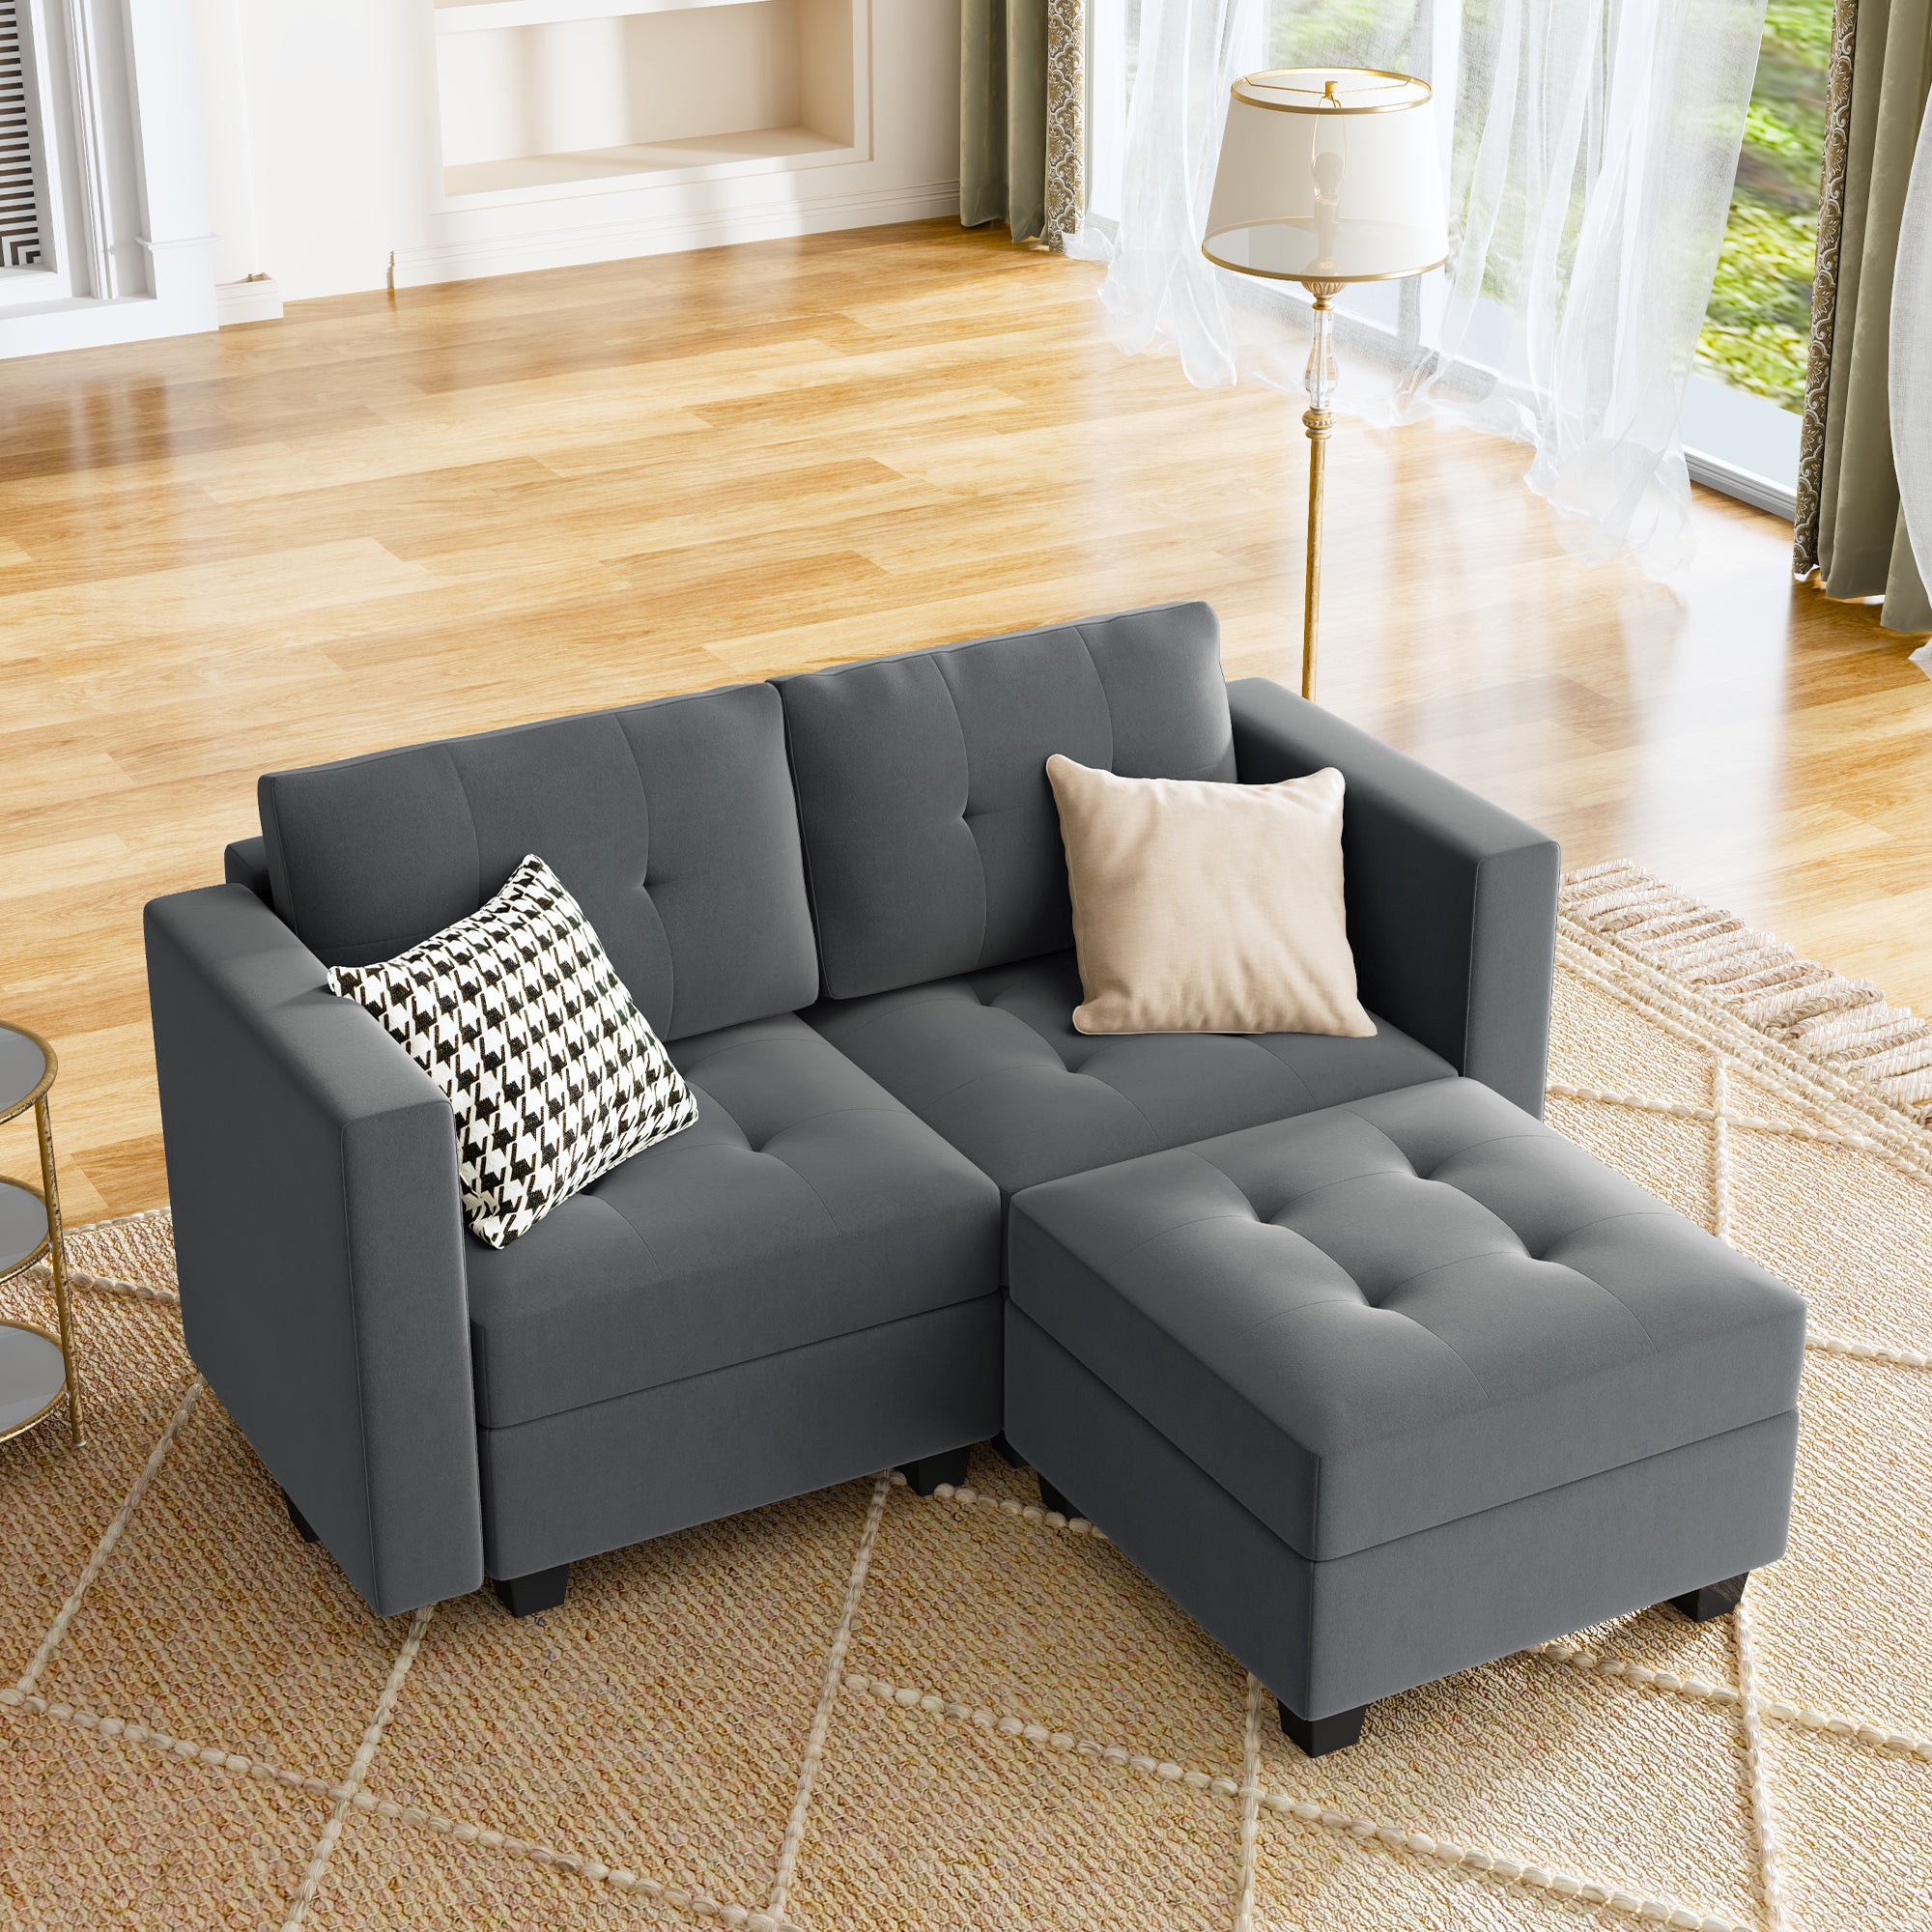 HONBAY 3-Piece Velvet Modular Sectional With Storage Seat